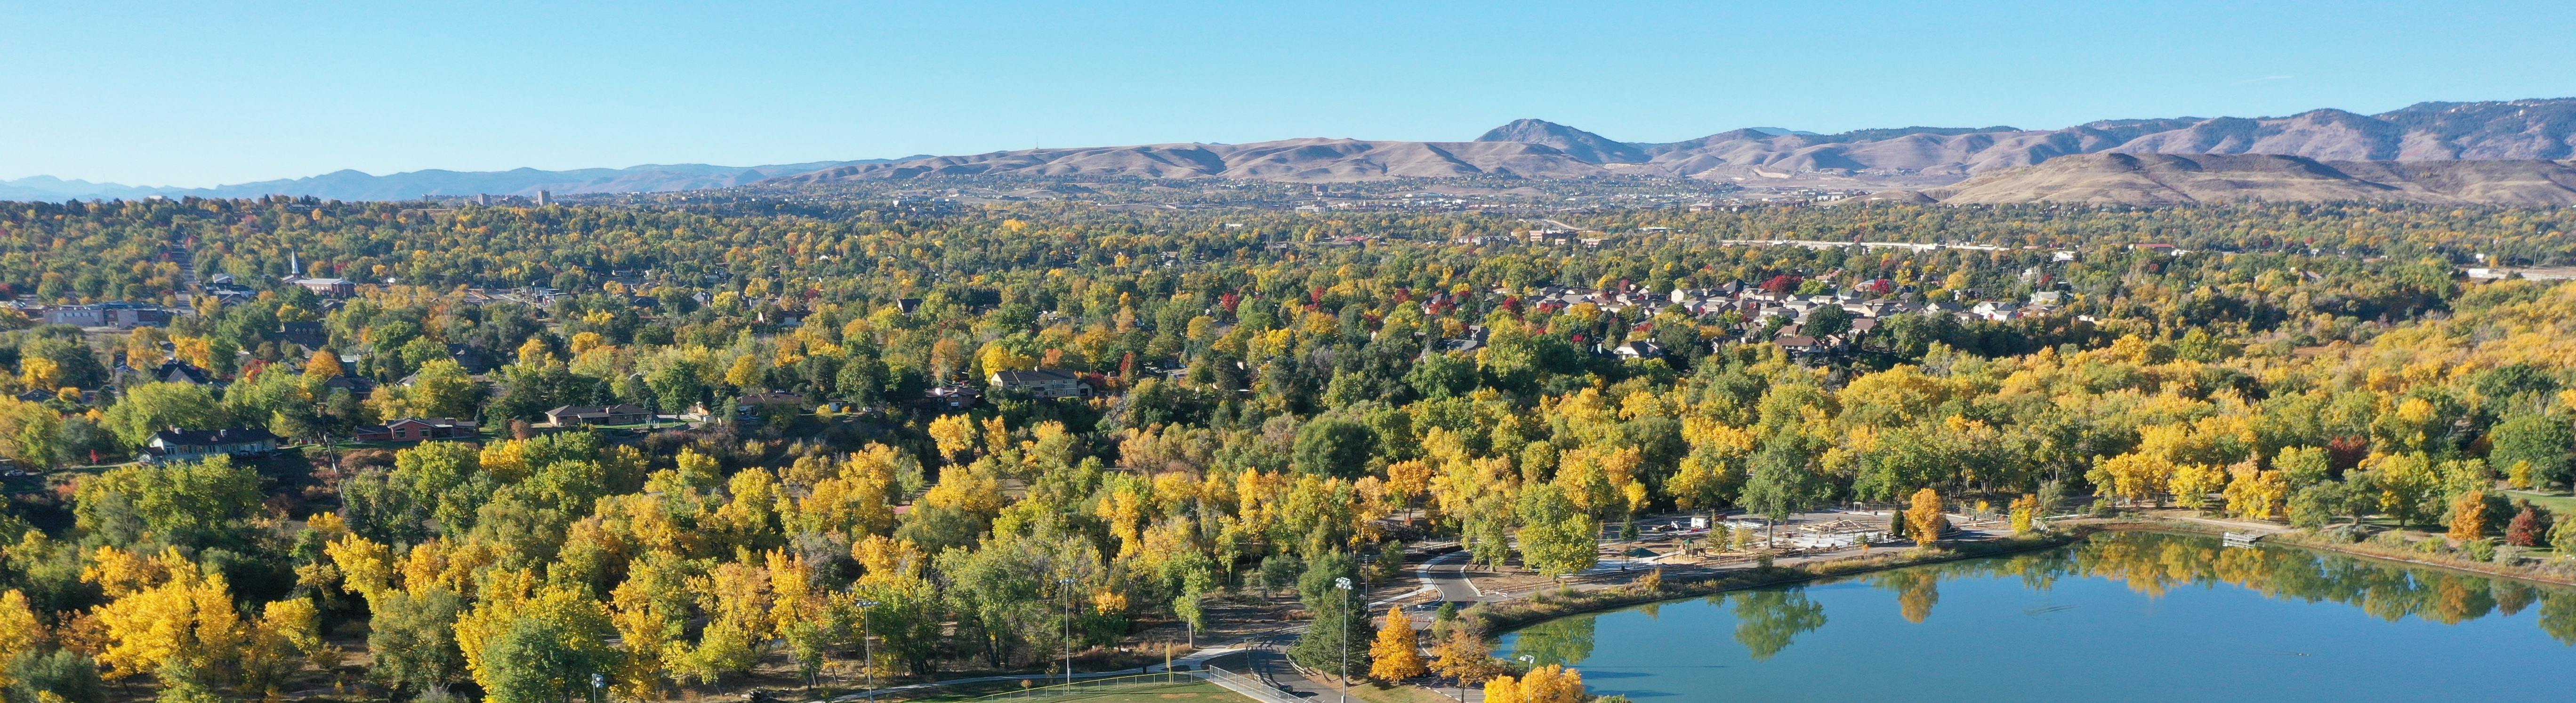 Aerial image of Wheat Ridge with trees and lake in foreground and mountains in background